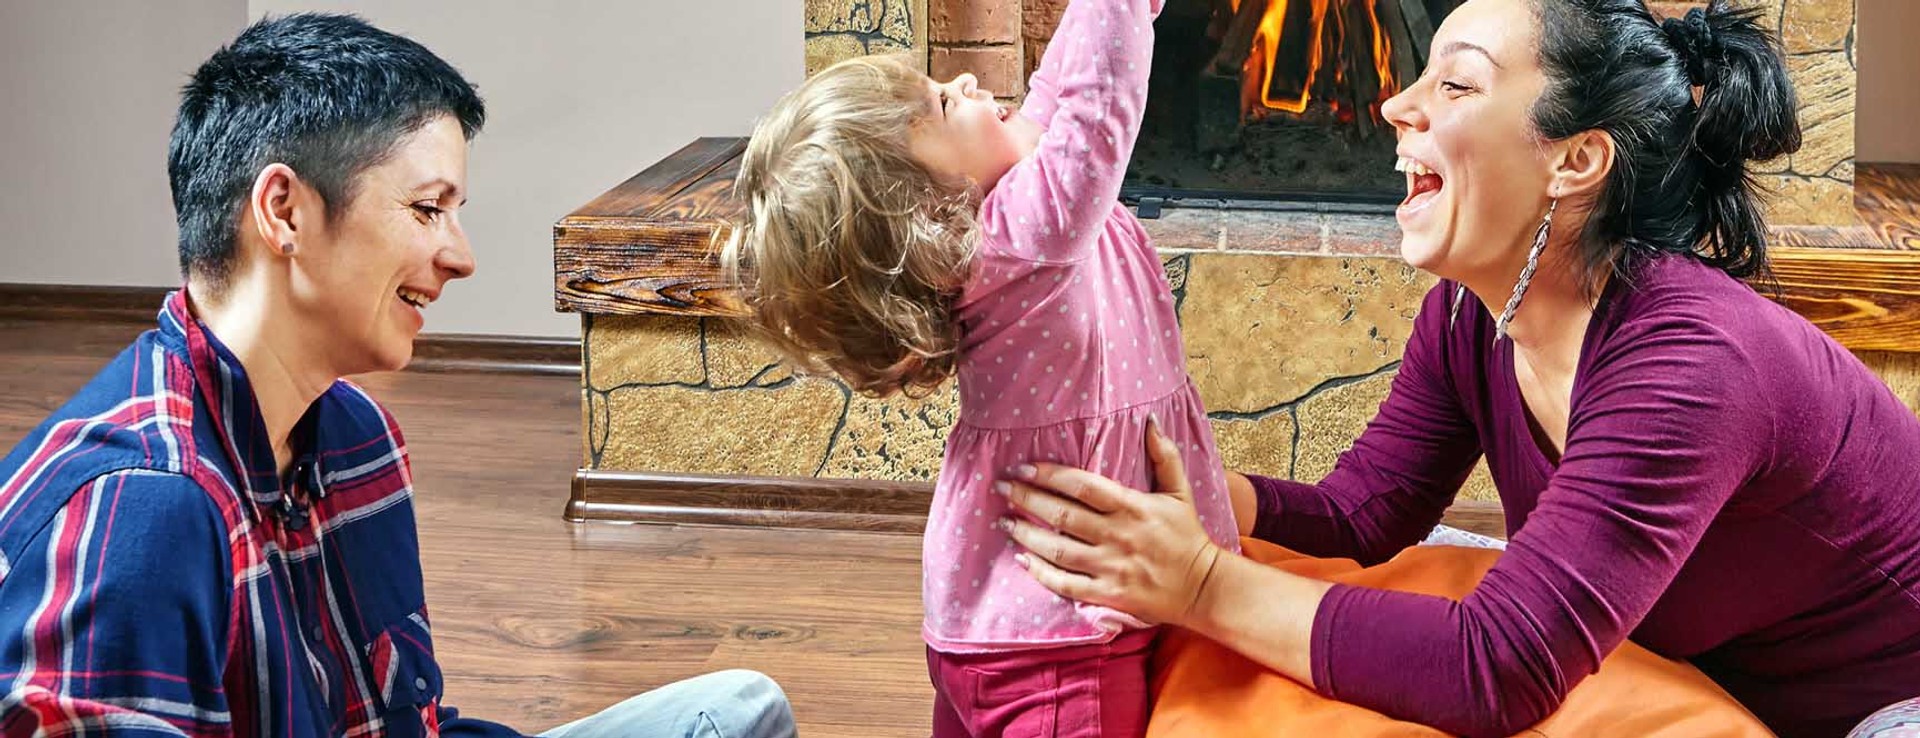 couple playing with child in front of fireplace